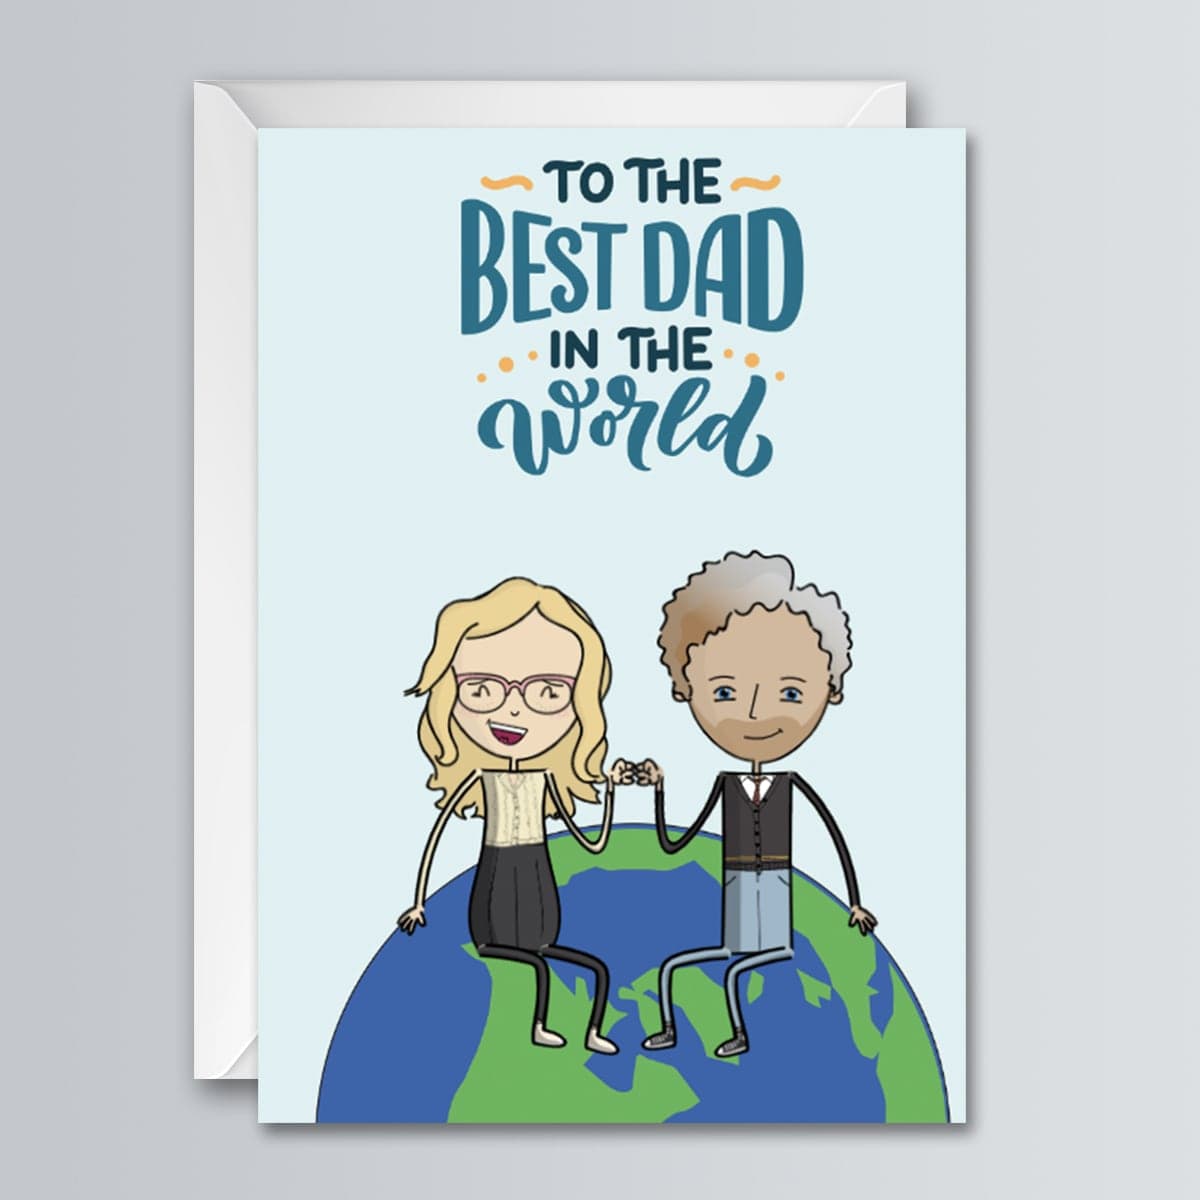 The Best Dad in the World- Greeting Card